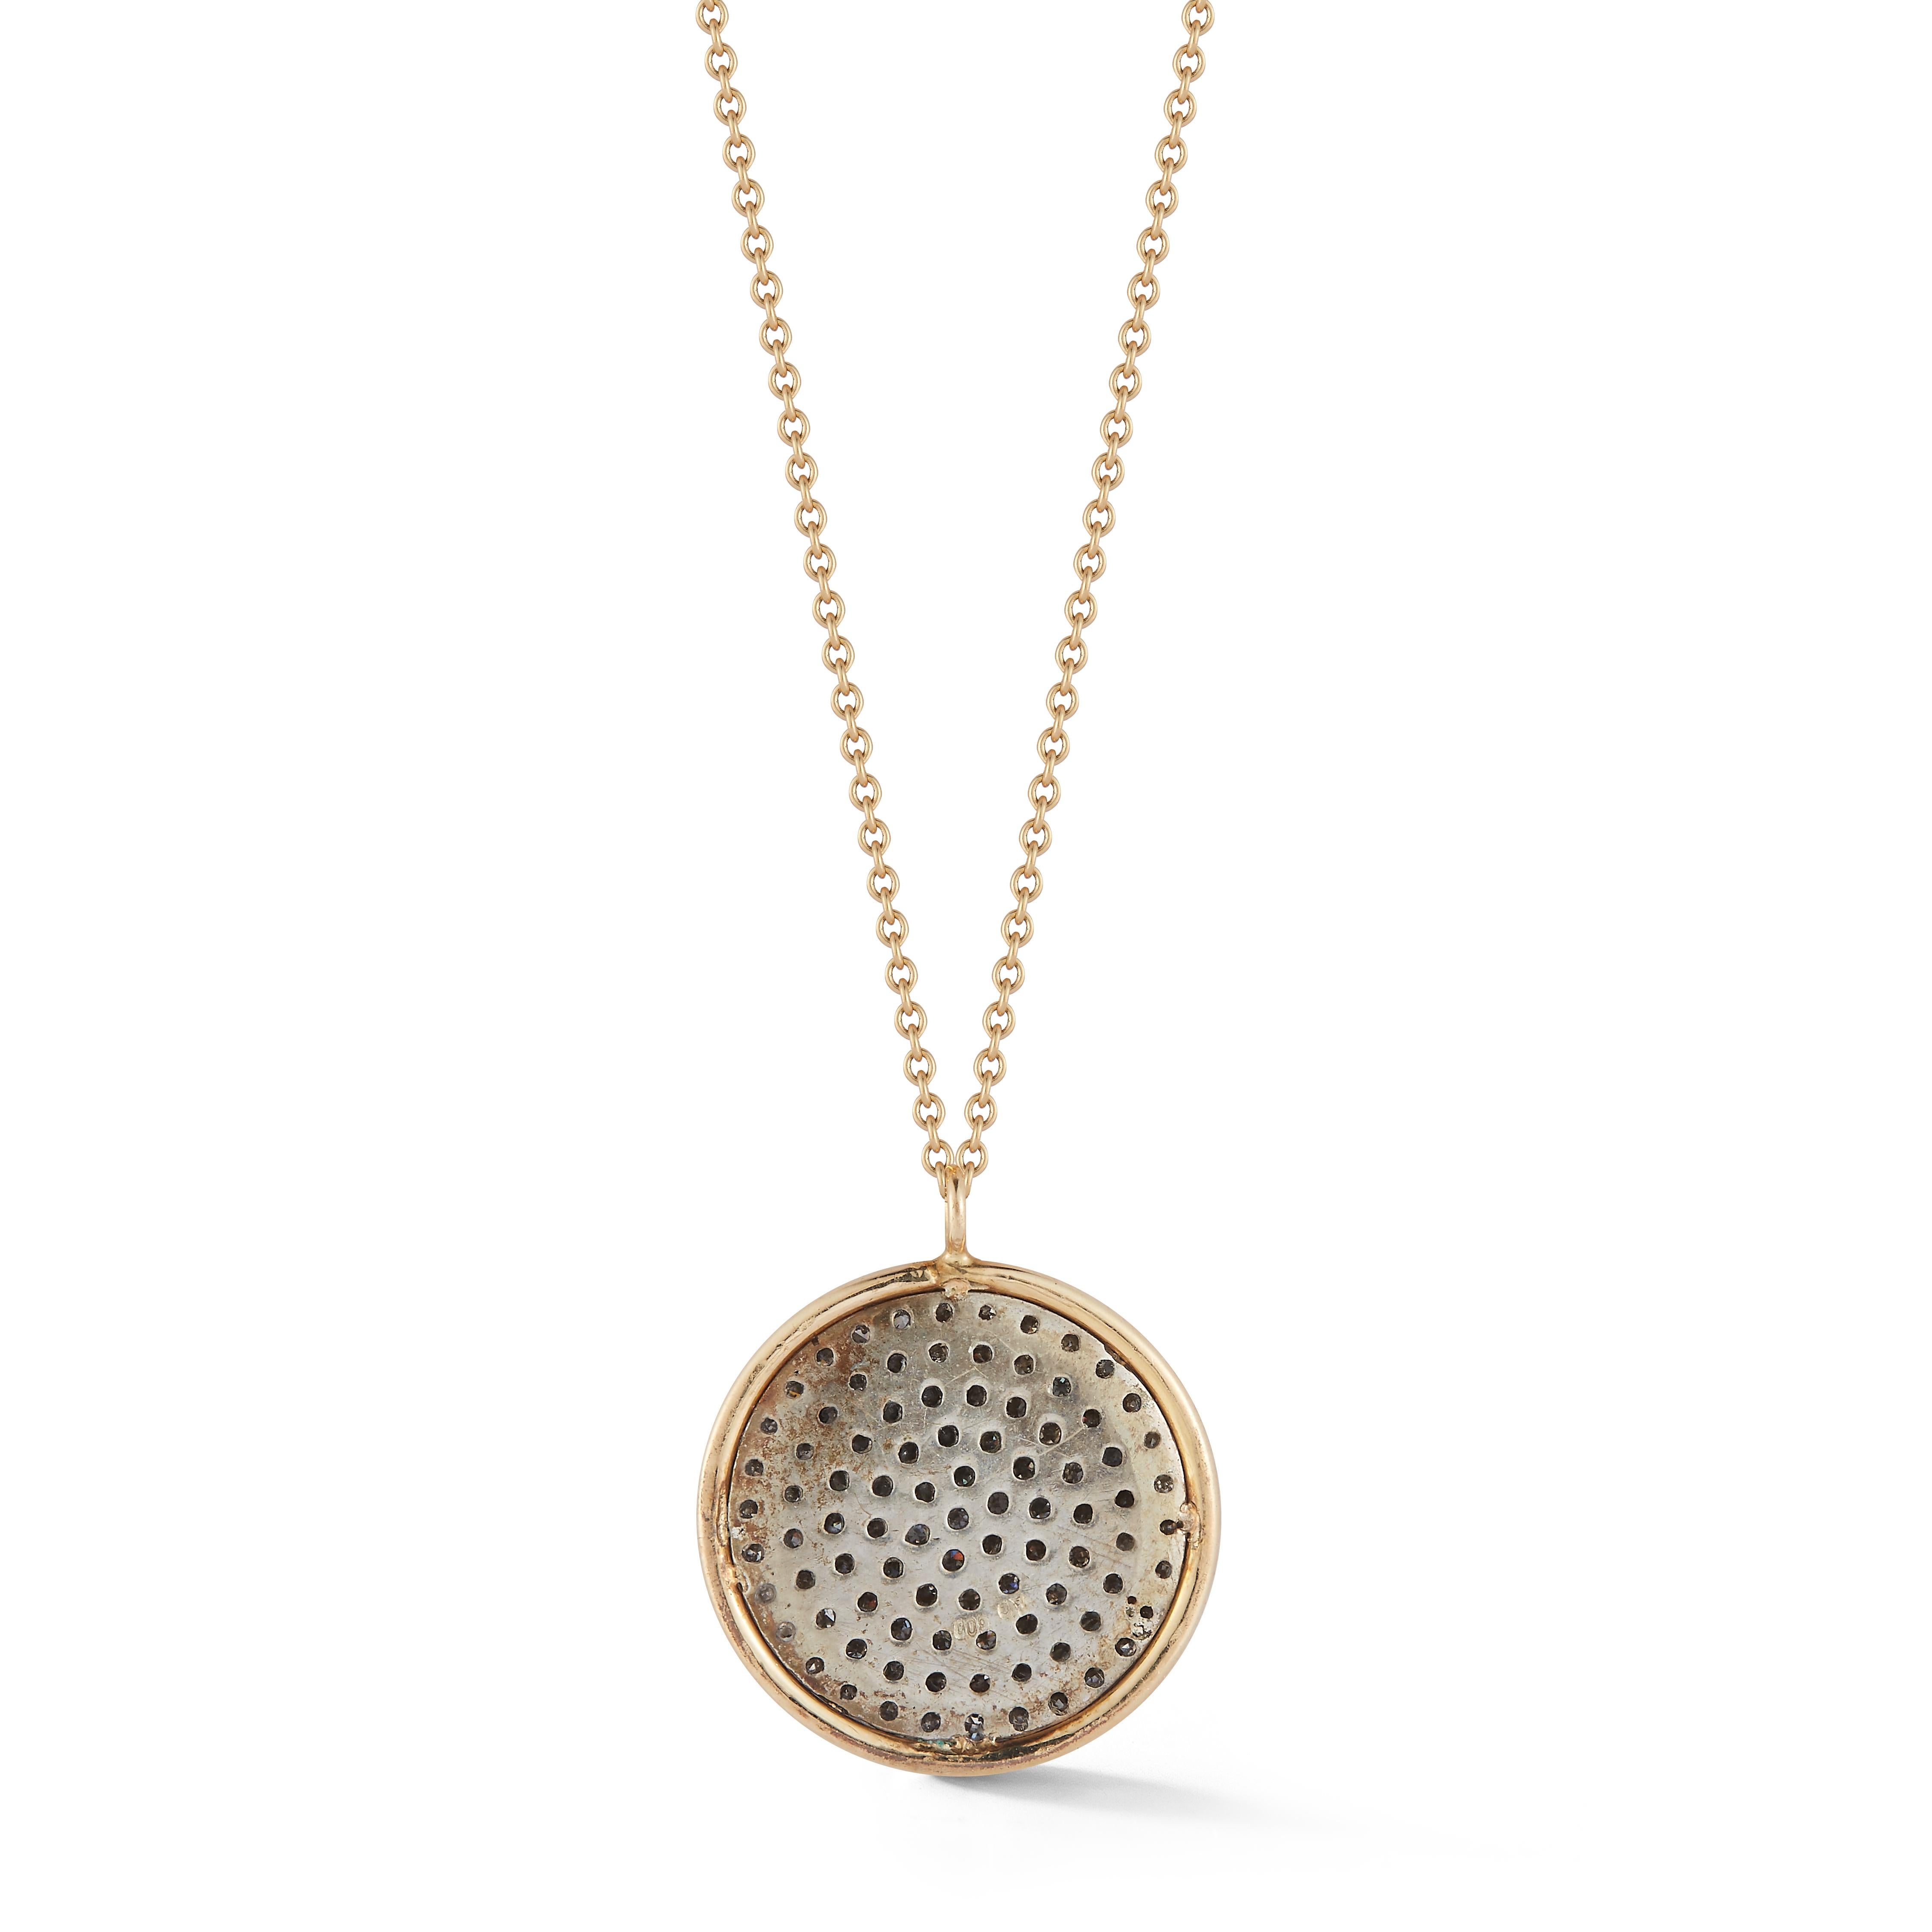 Parulina Couture Fine Jewelry- Diamond Disc Pendant in Silver and Yellow Gold Wire from the Night Sky Collection.
Disc measures 14mm.
16.5 inch chain length.

Metal: Silver and Yellow Gold
Diamond Carat Weight: 0.63ct

